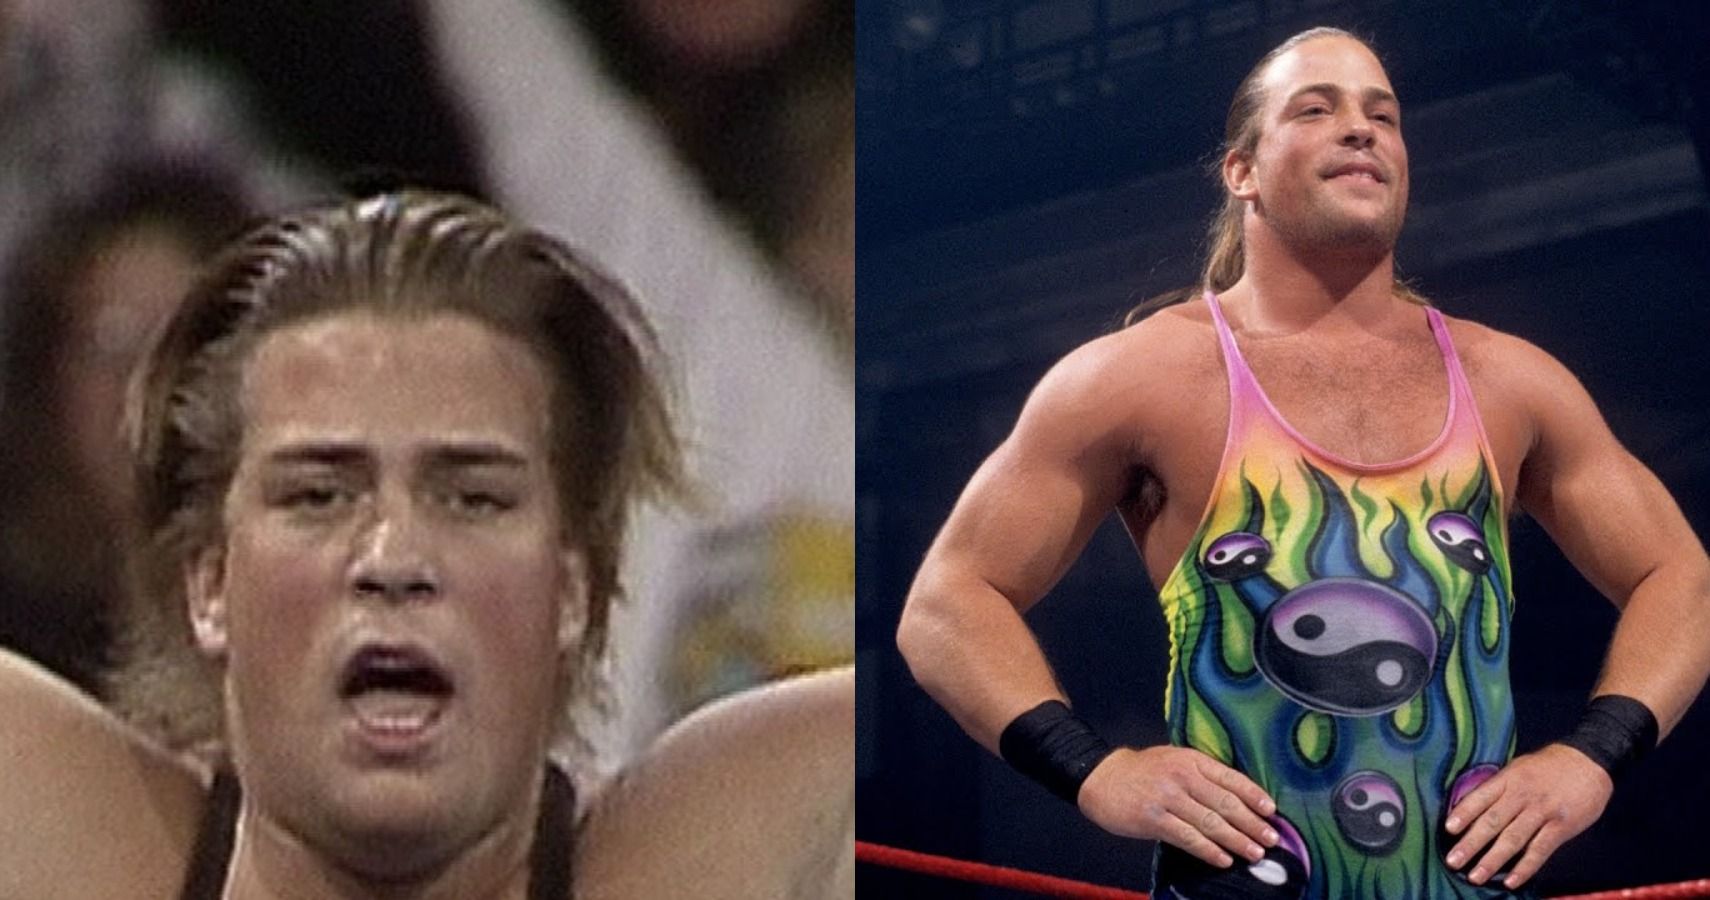 RVD In WCW And WWE